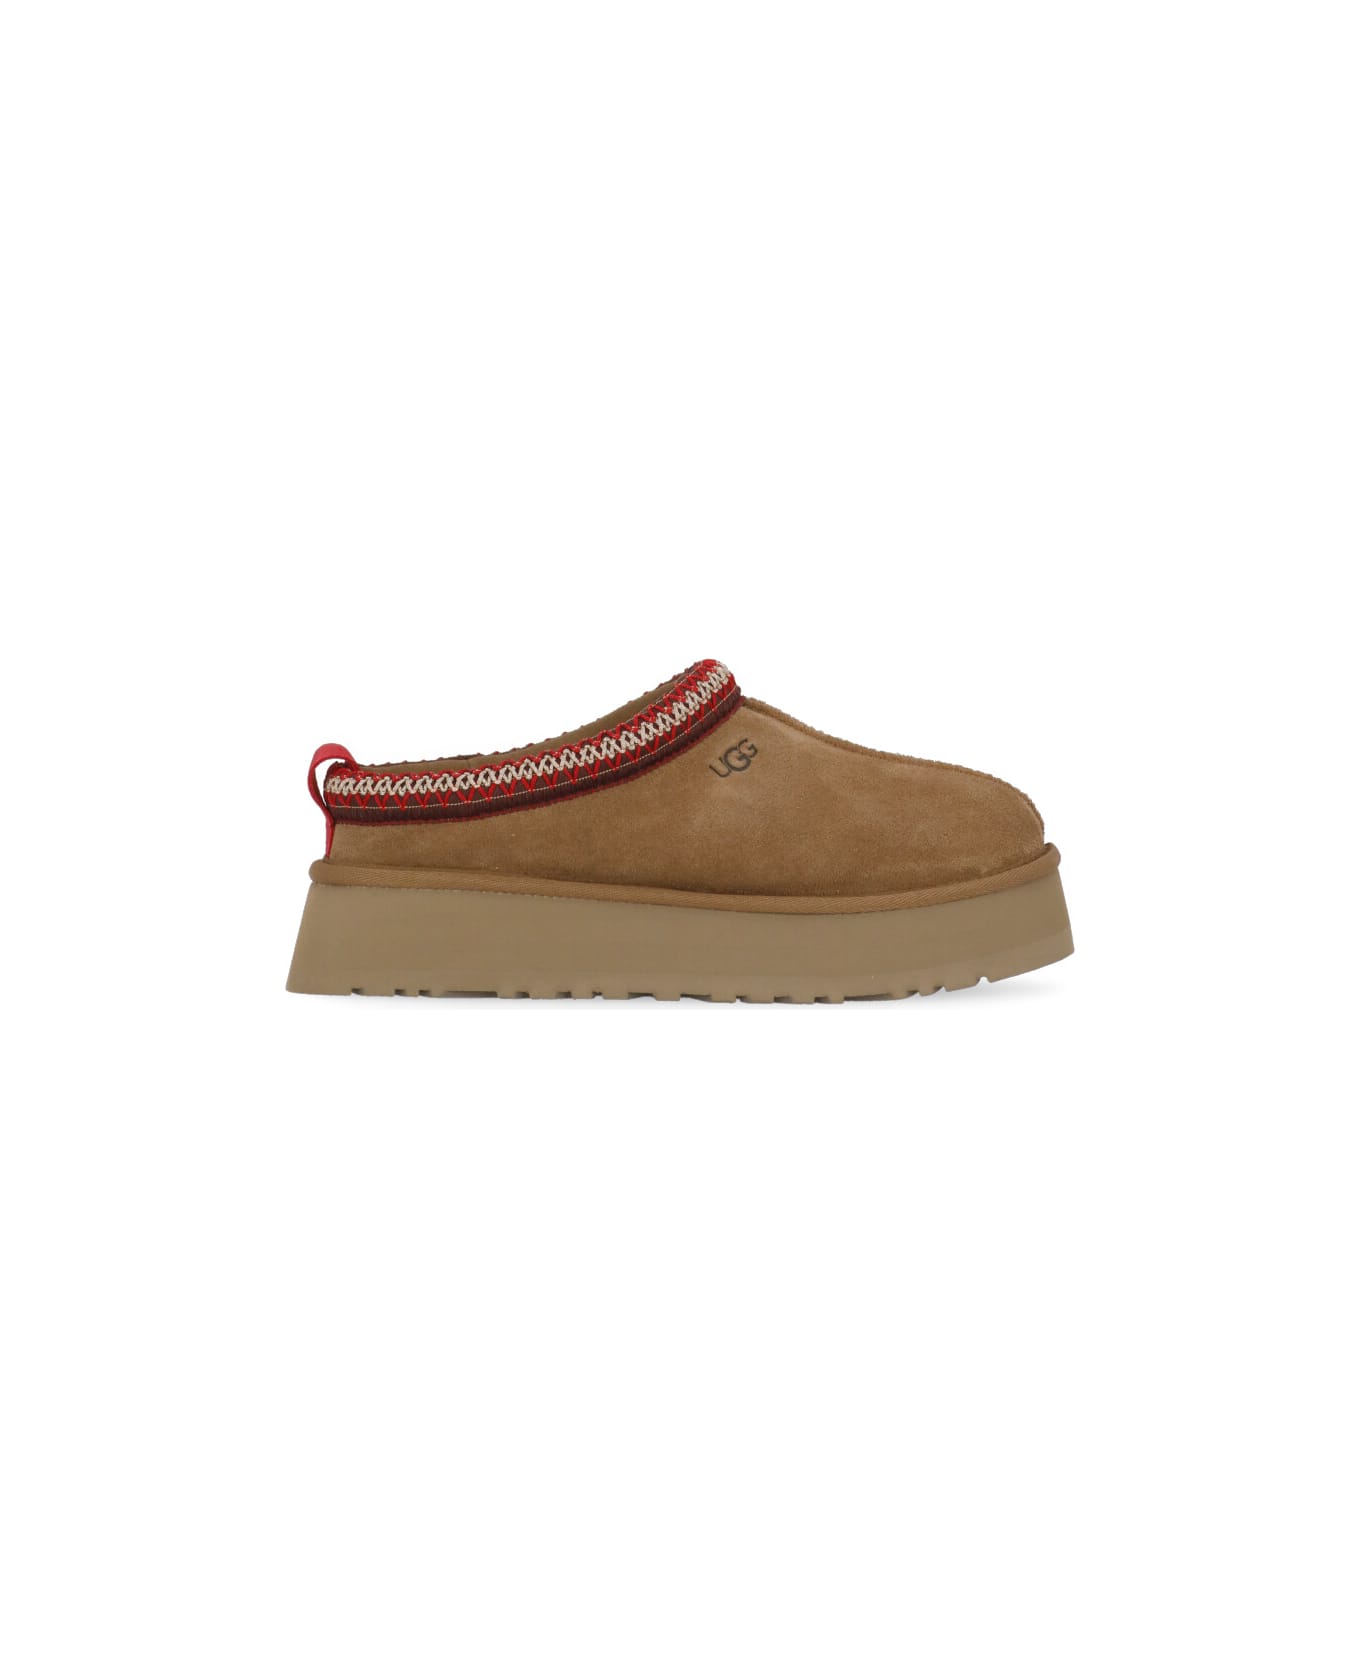 UGG Tazz Slippers - Brown